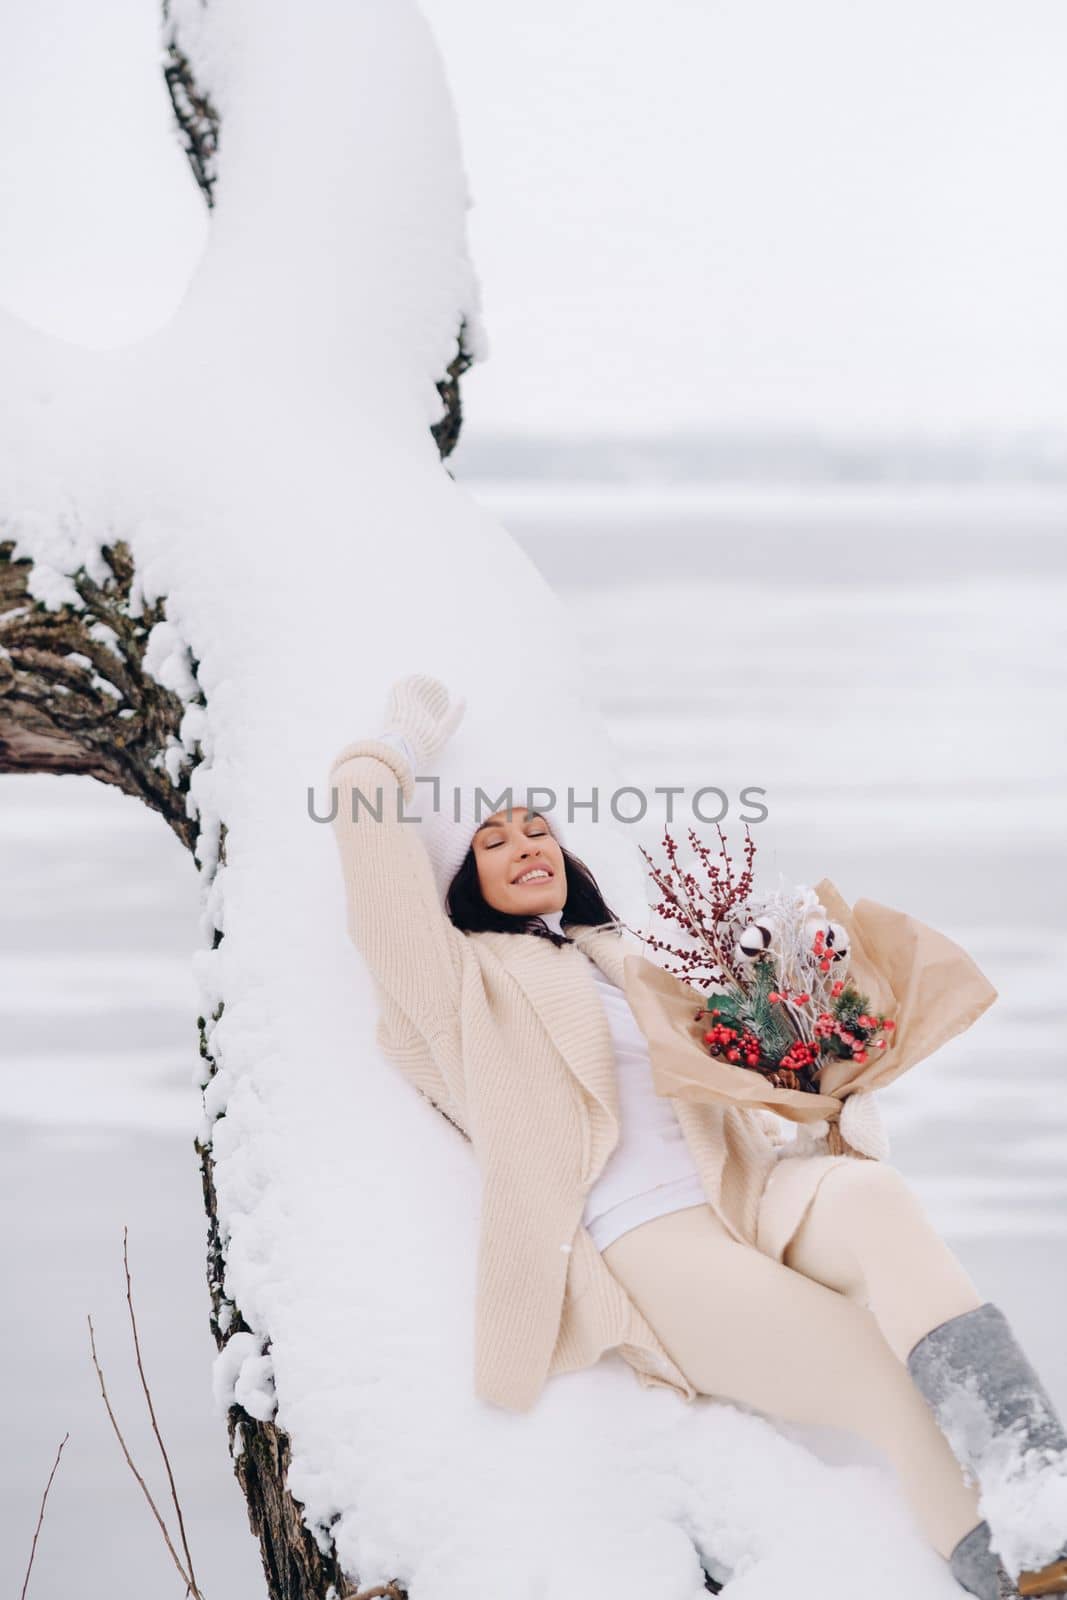 A beautiful girl in a beige cardigan and a white hat with flowers enjoys a snowy winter in nature by Lobachad